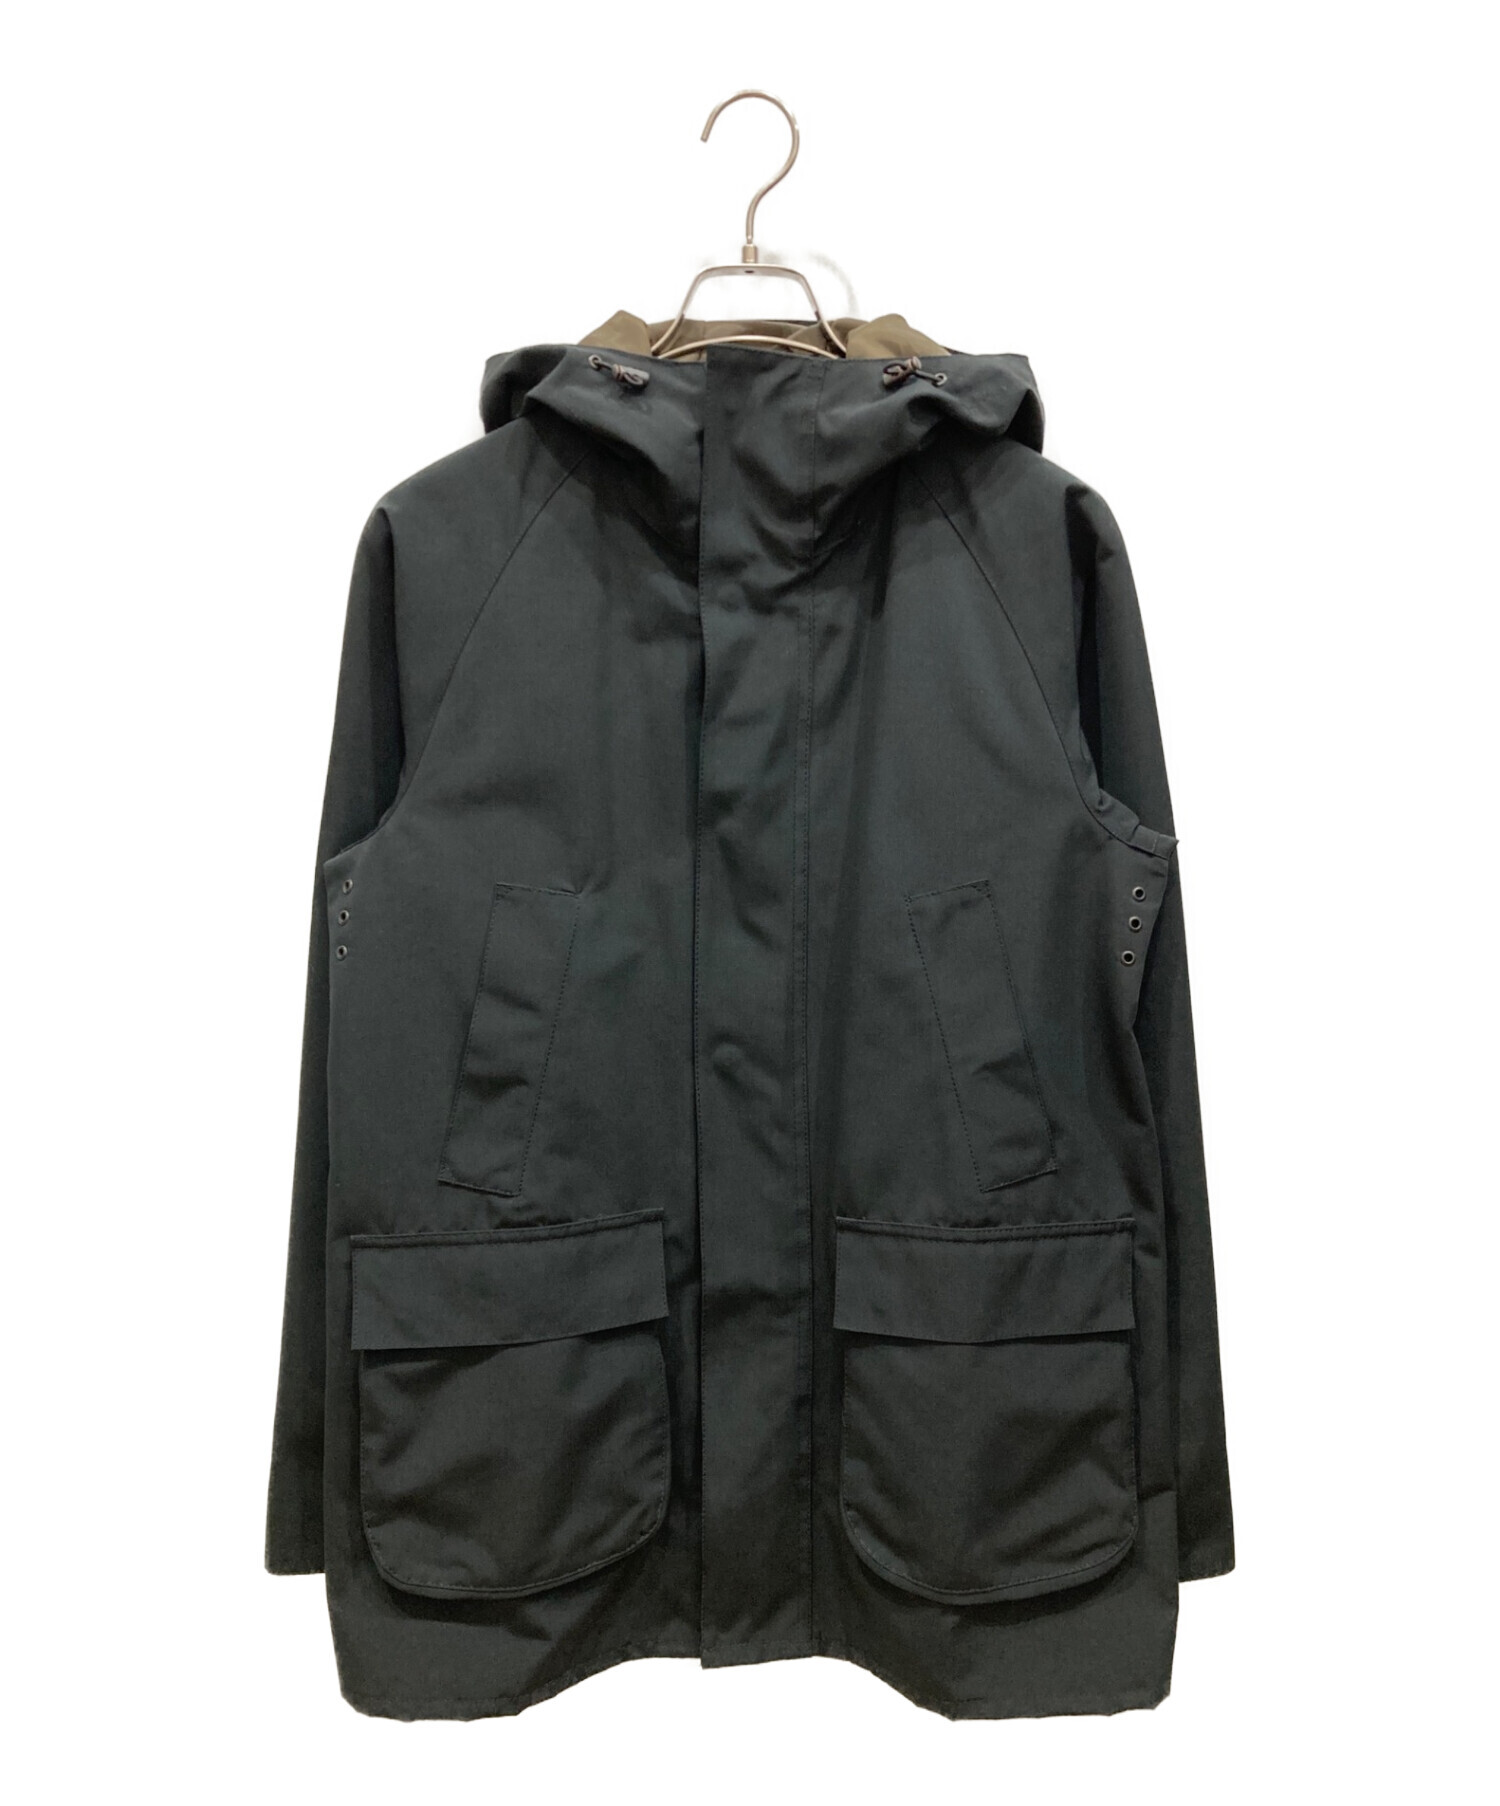 Barbour バブアー　edifice別注　hooded bedaleジャケット